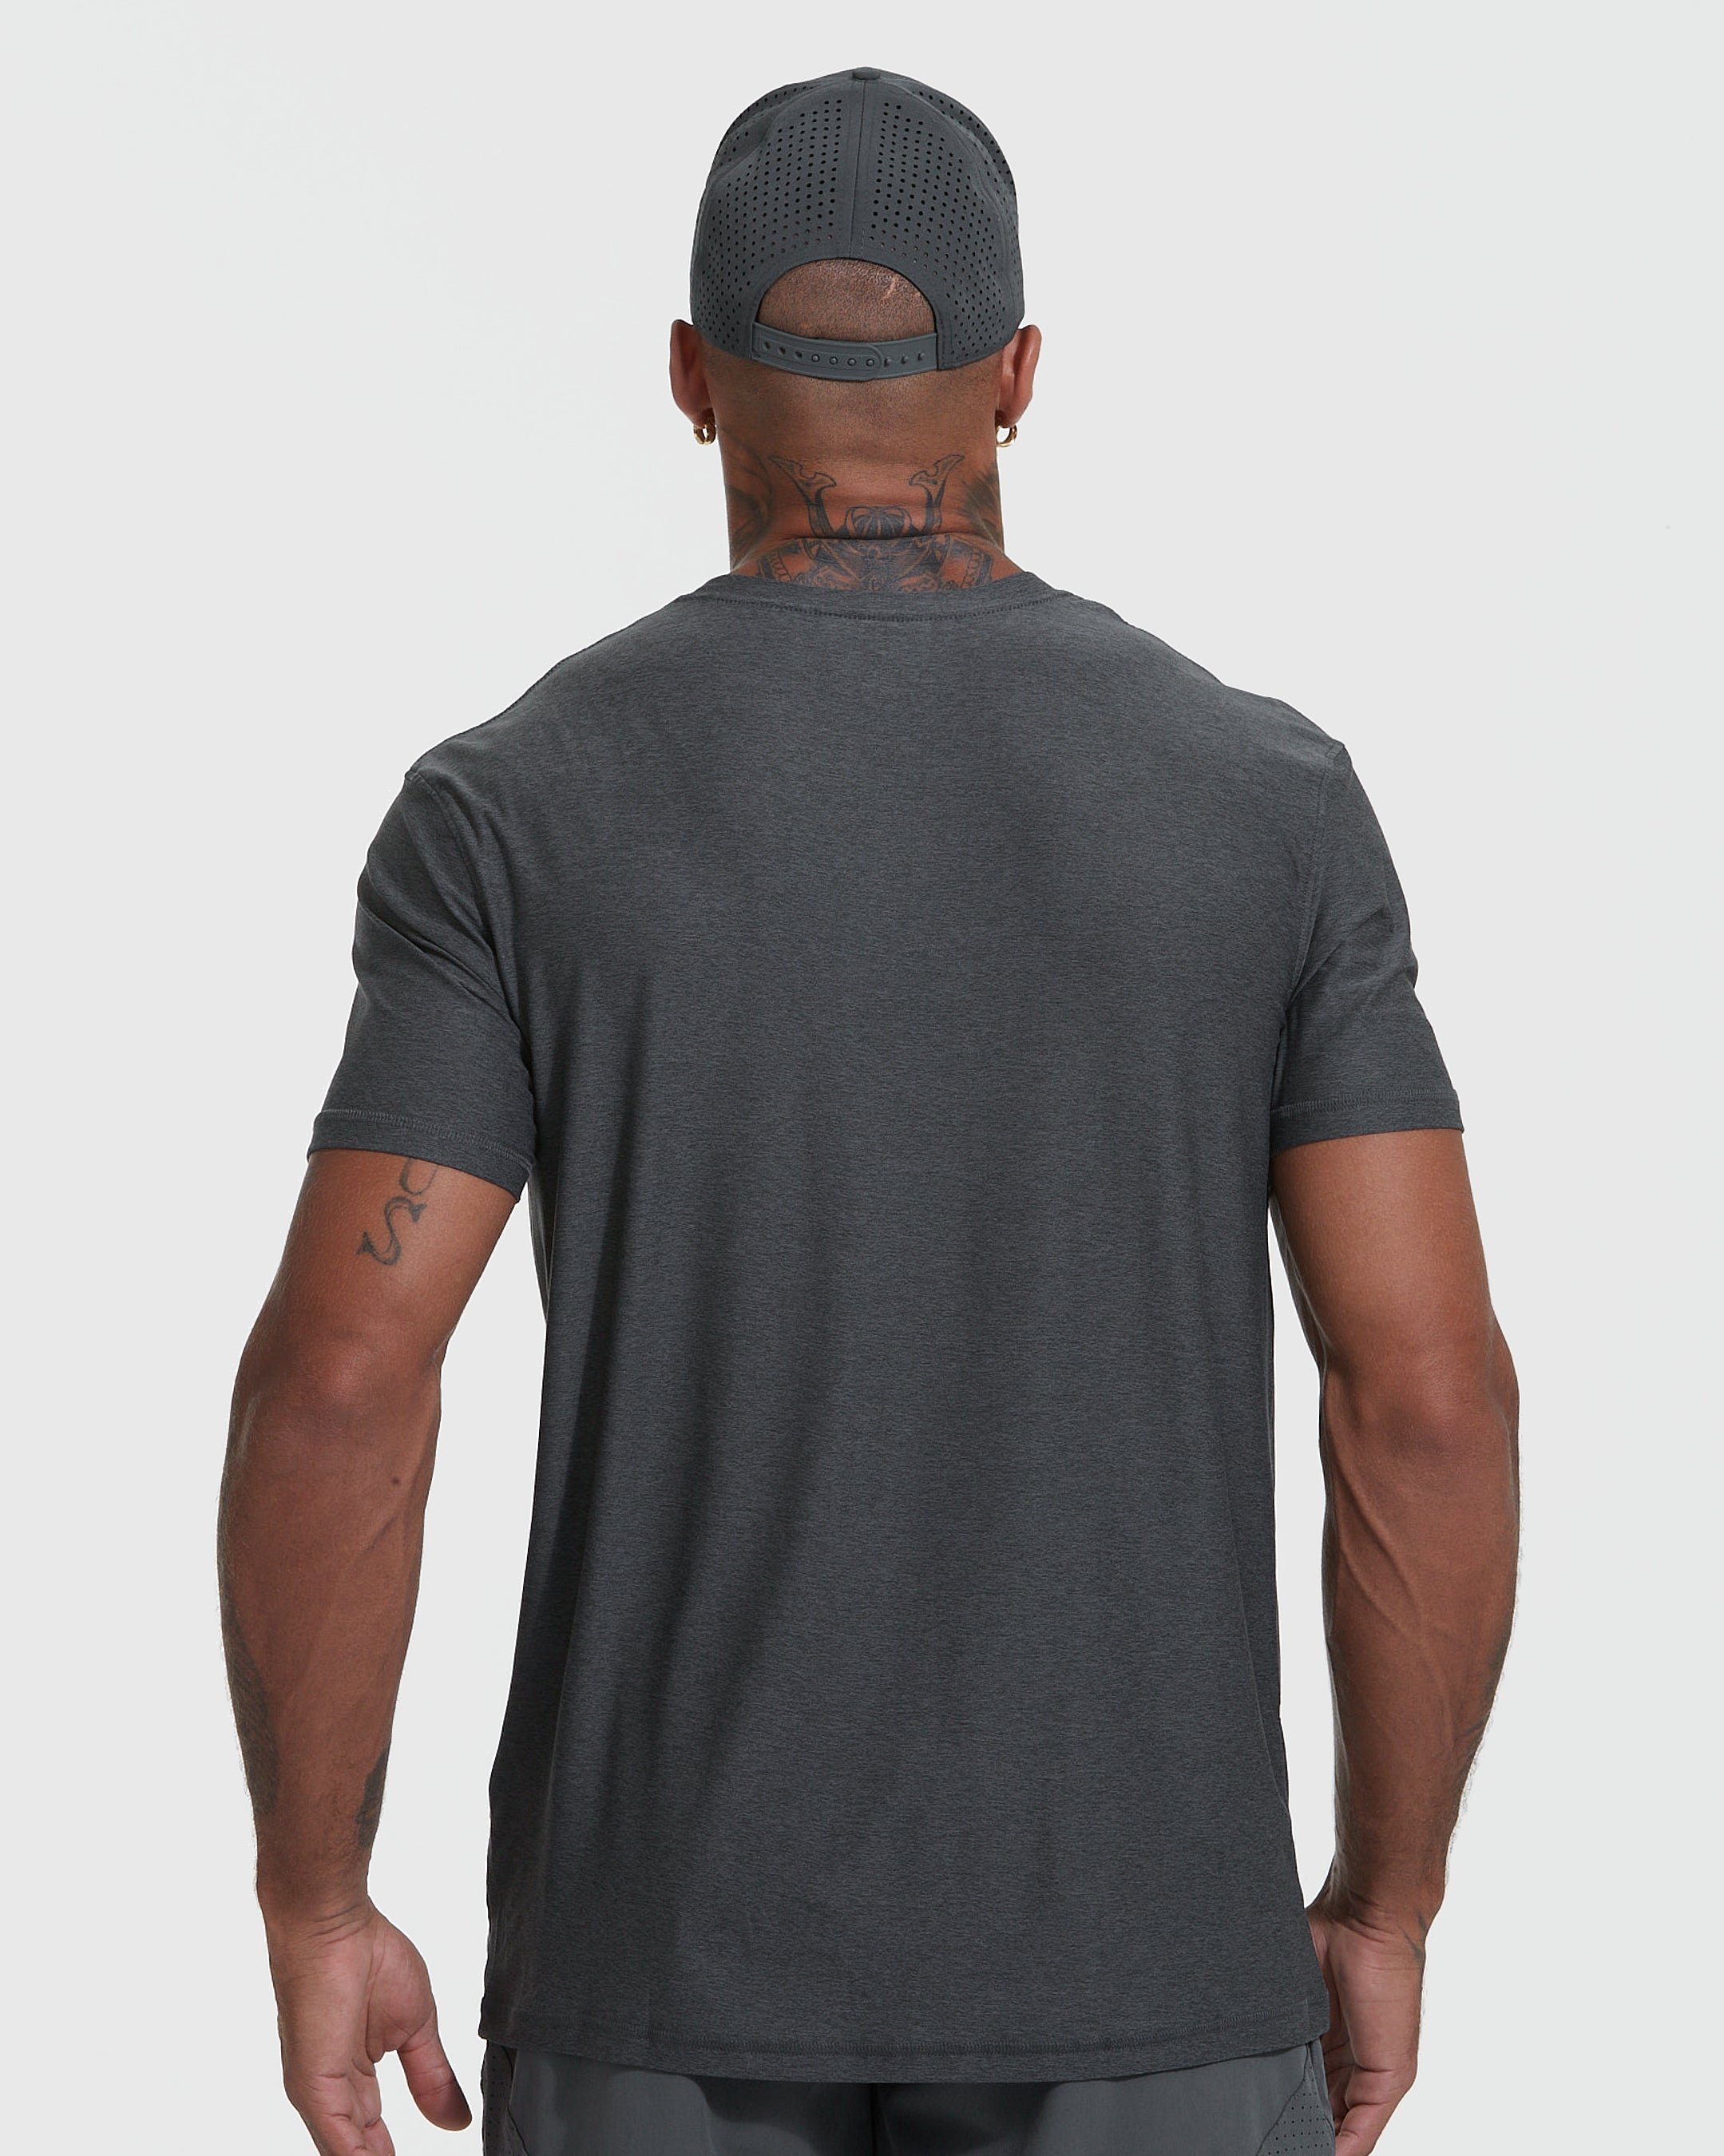 The Heather Color Active Crew Neck T-Shirt 3-Pack